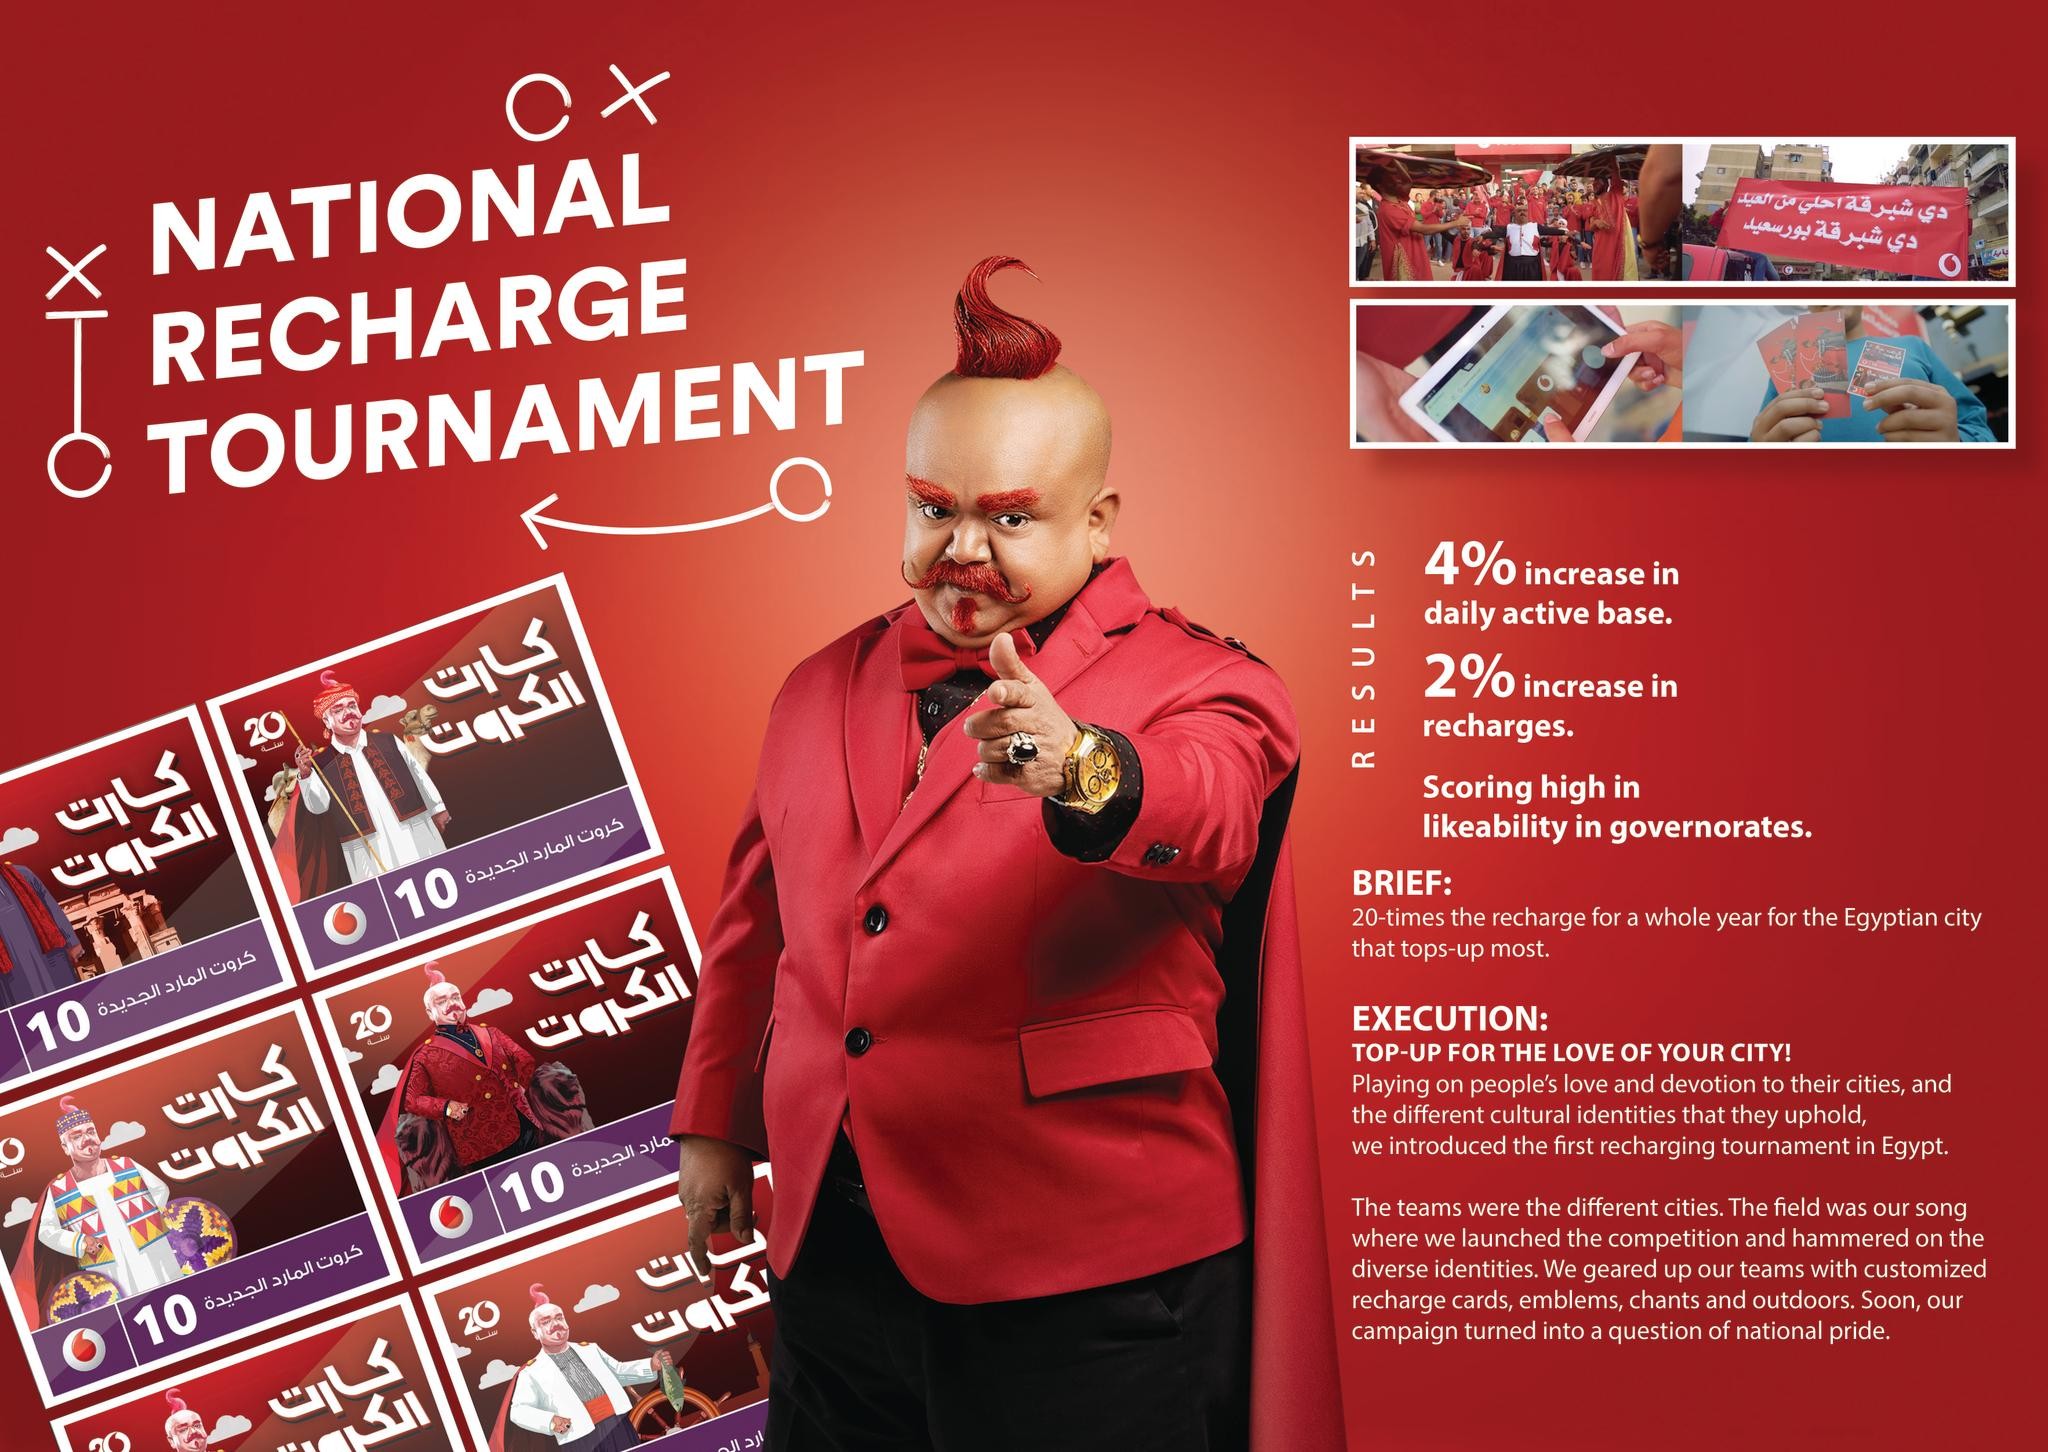 The Recharge Tournament